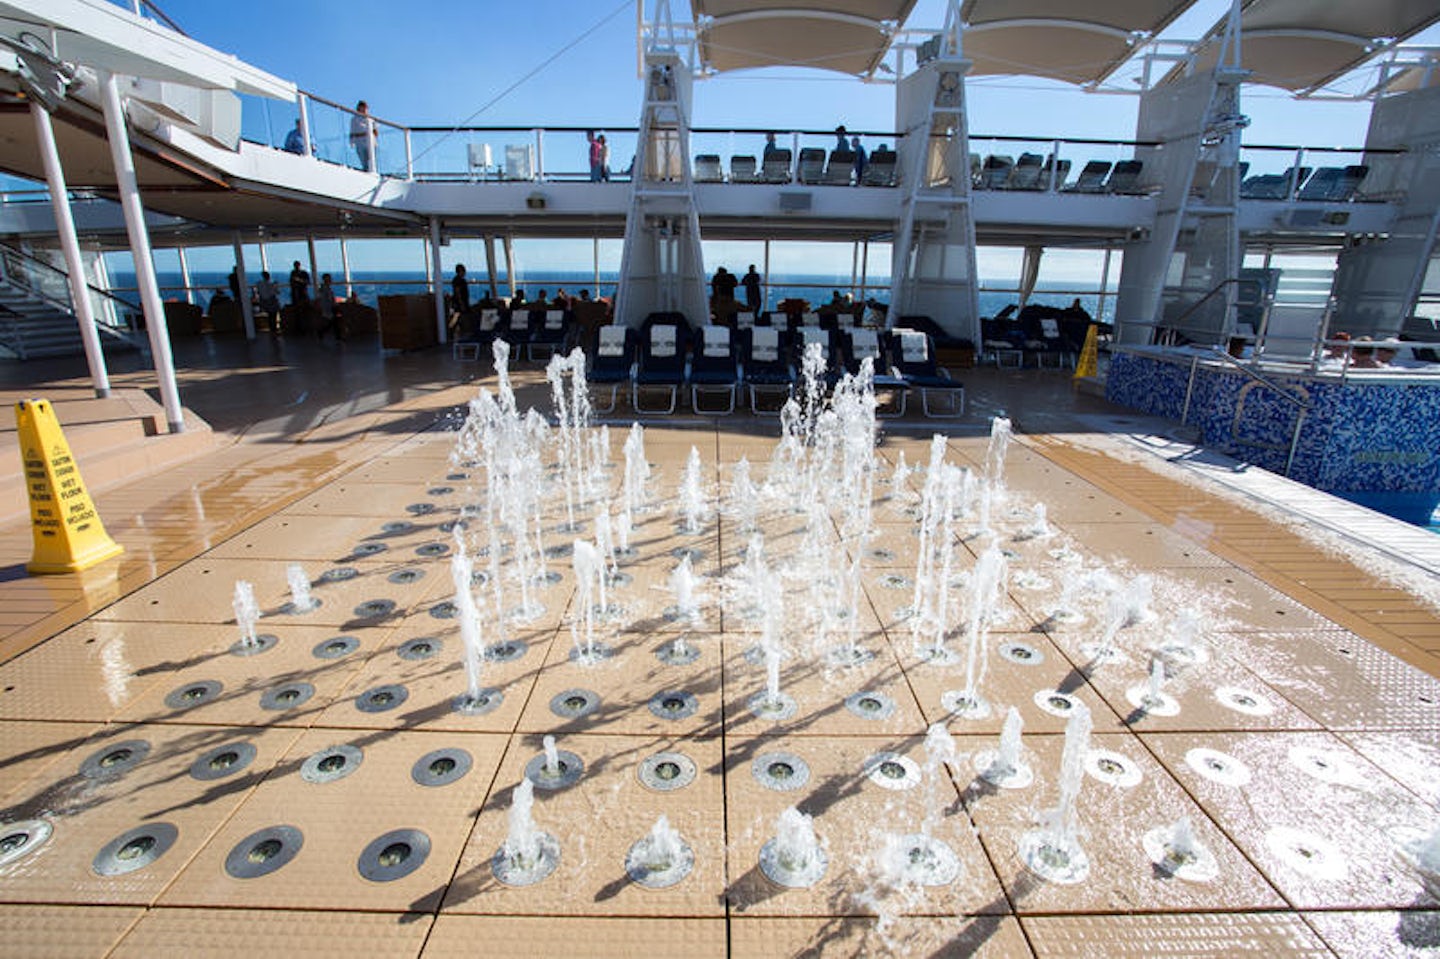 The Wet Zone on Celebrity Solstice